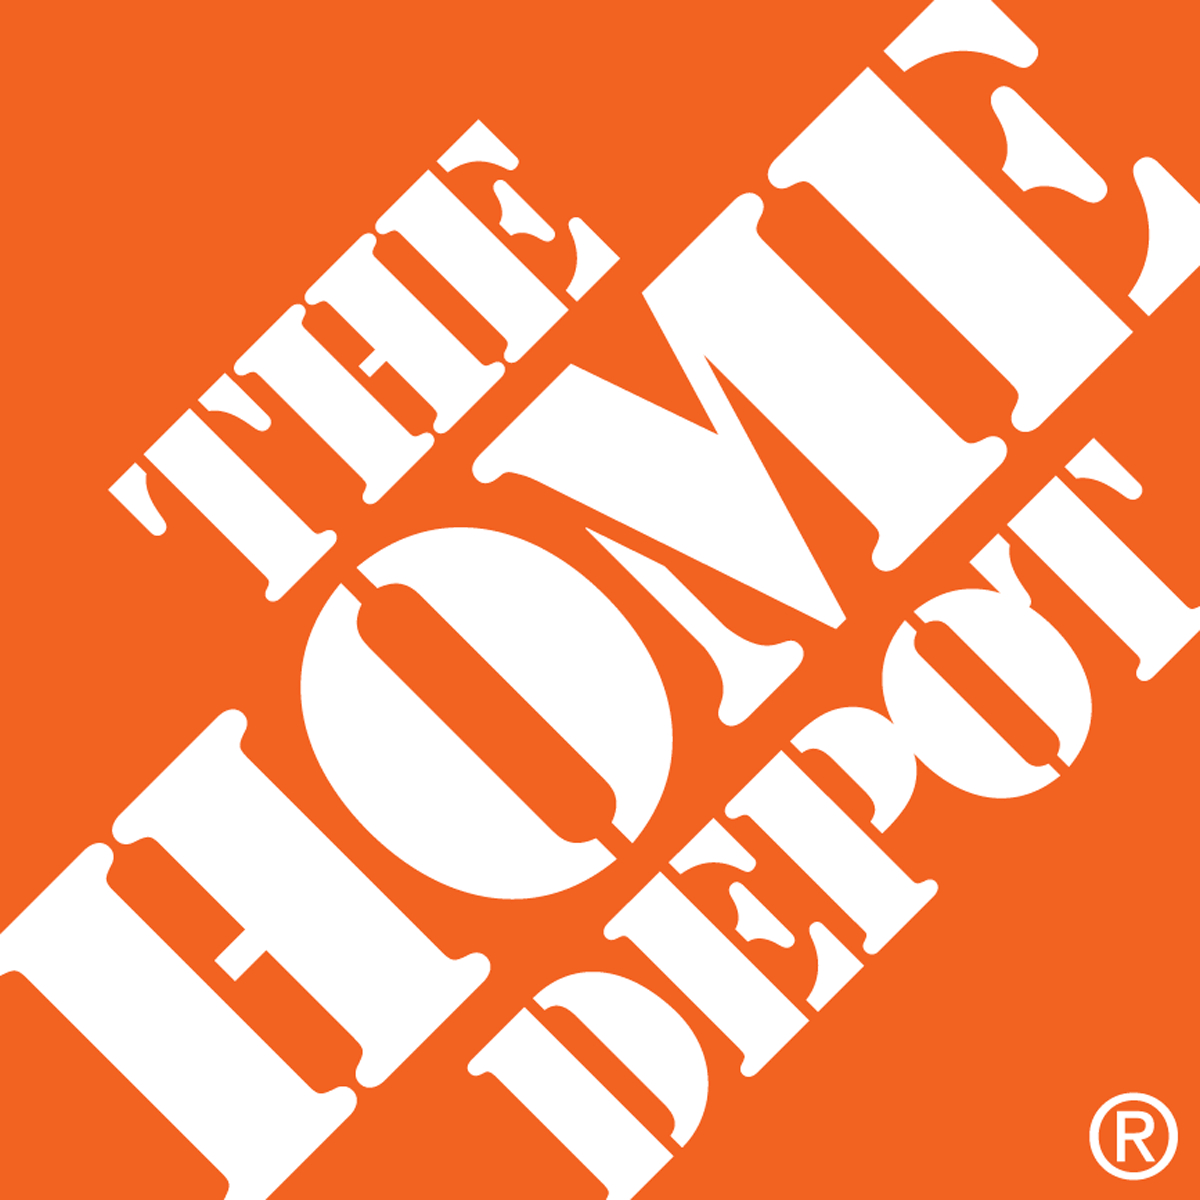 15% Off Home Depot Coupons, Promo Codes &amp;amp; Deals 2019 - Savings - Free Printable Home Depot Coupons